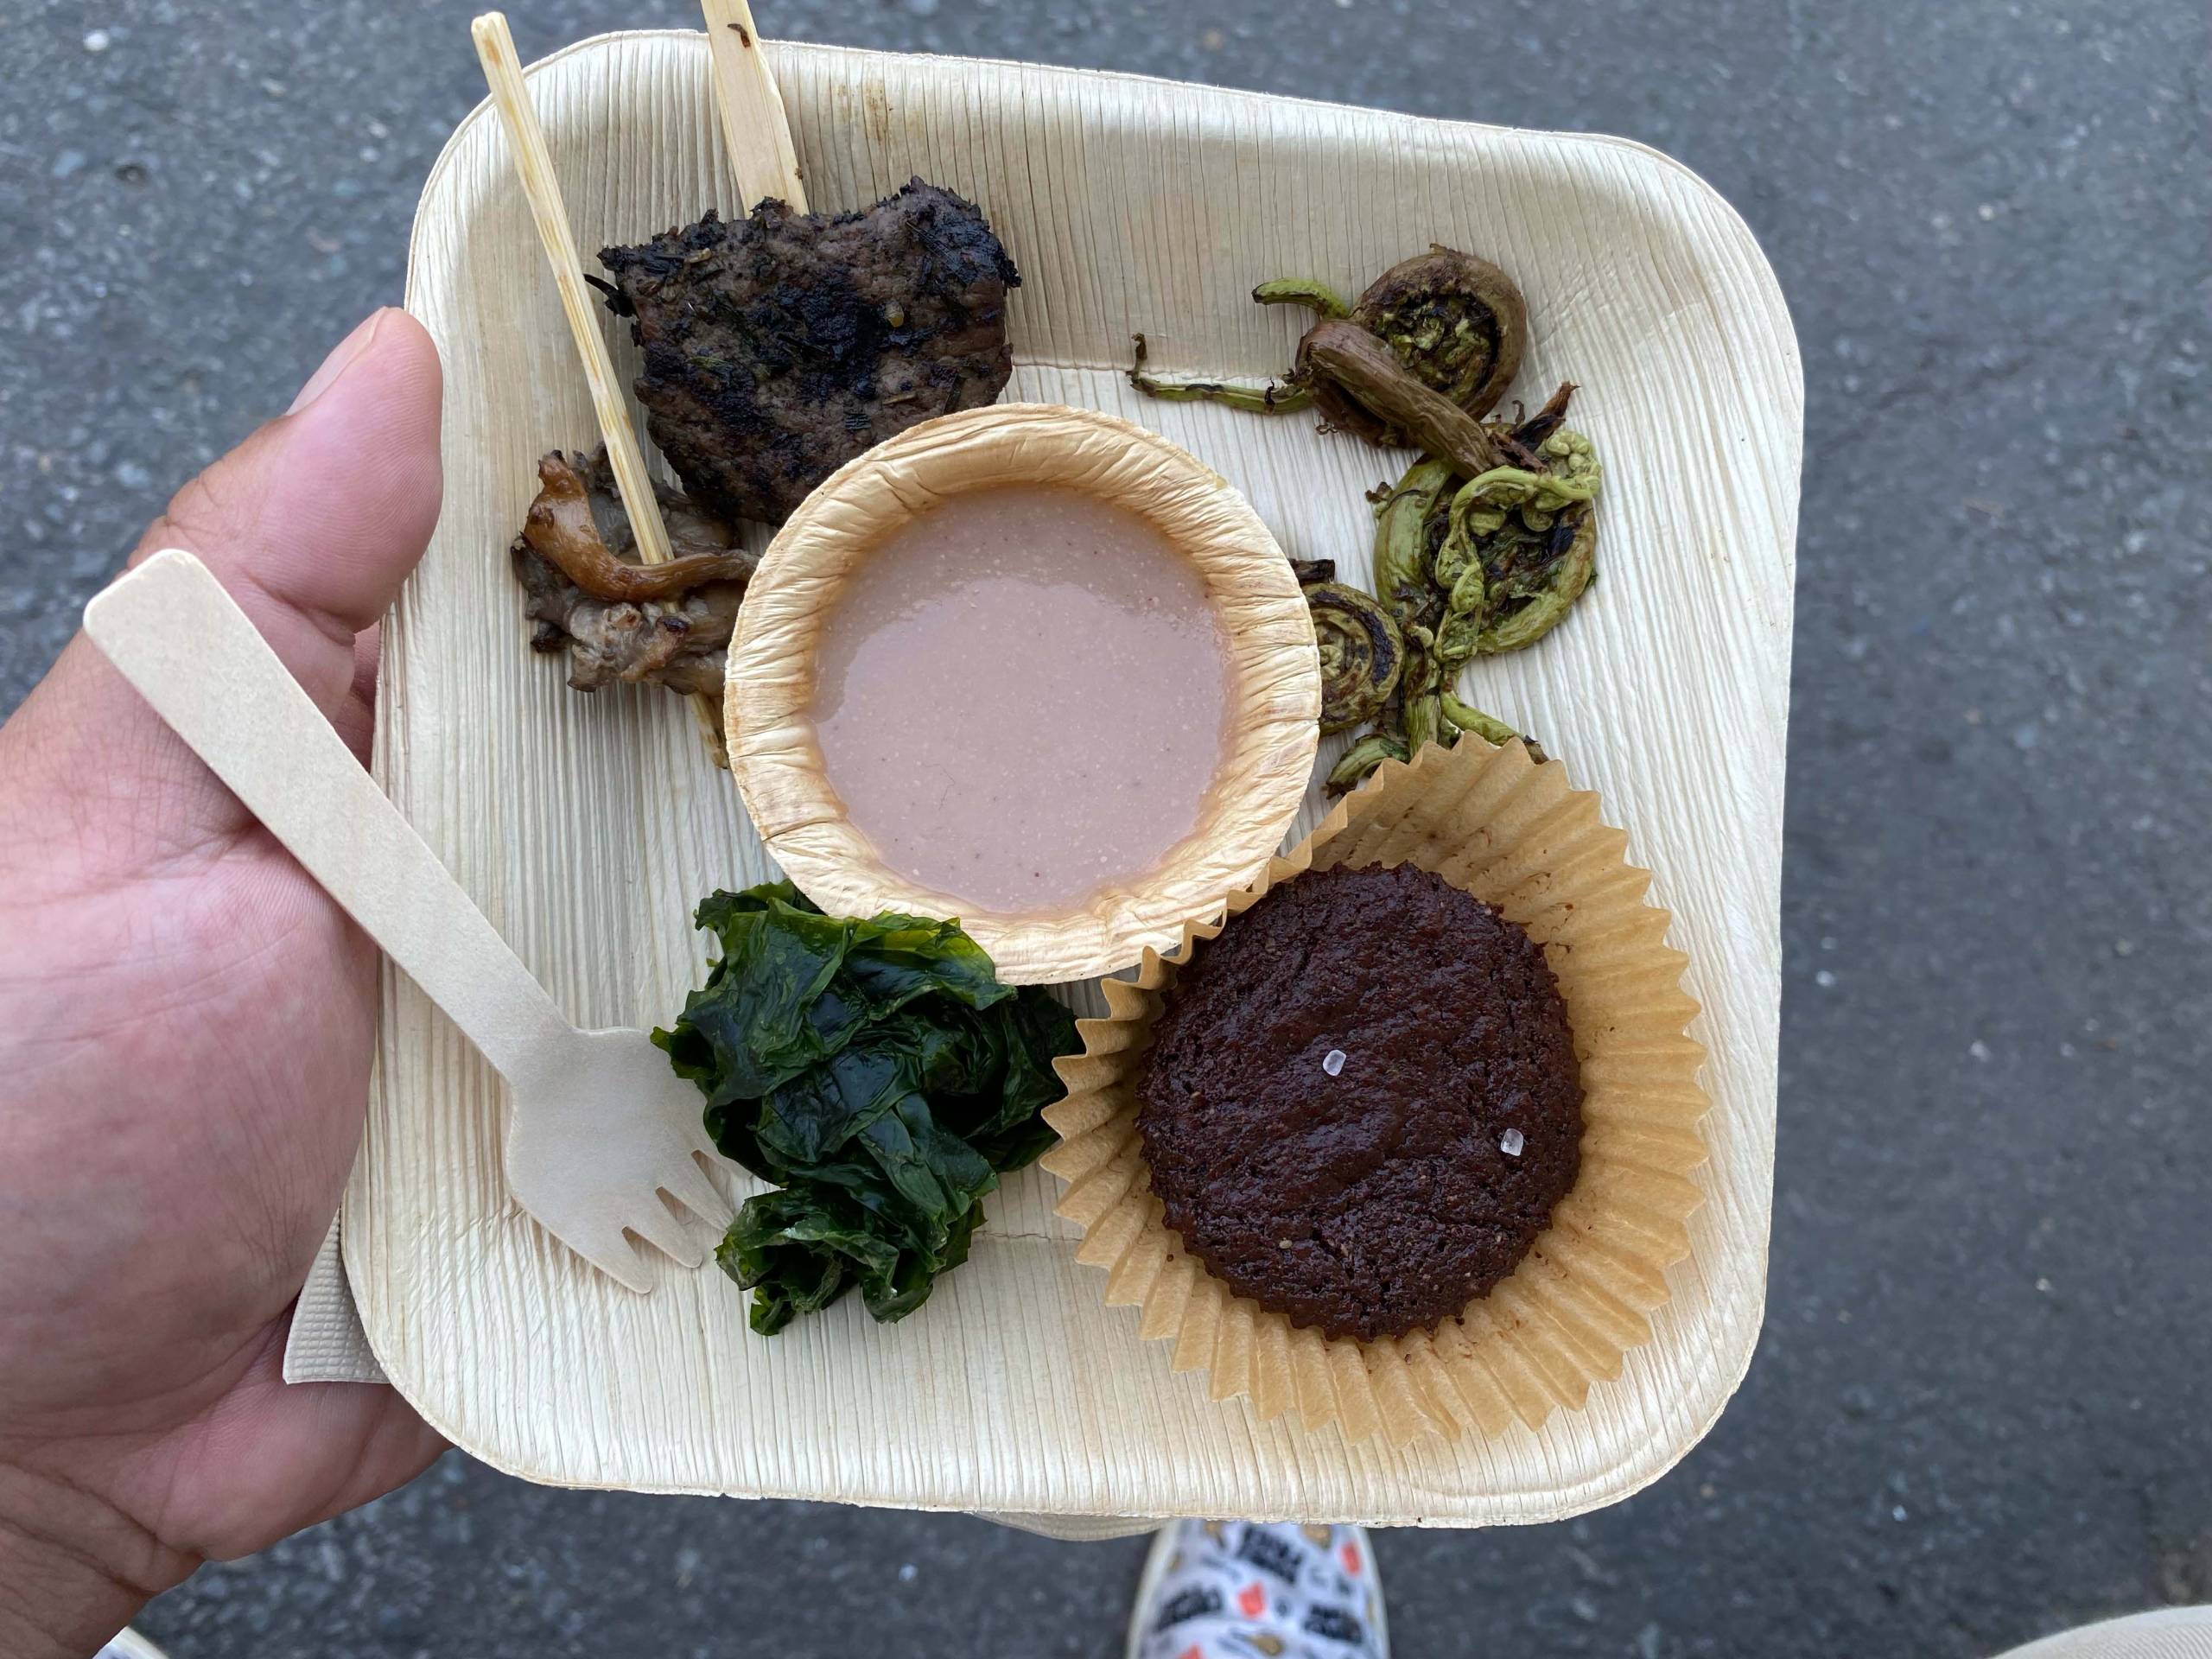 A sampler plate of Ohlone food includes a small dish of acorn soup, fried sea lettuce and a skewer of venison backstrap.